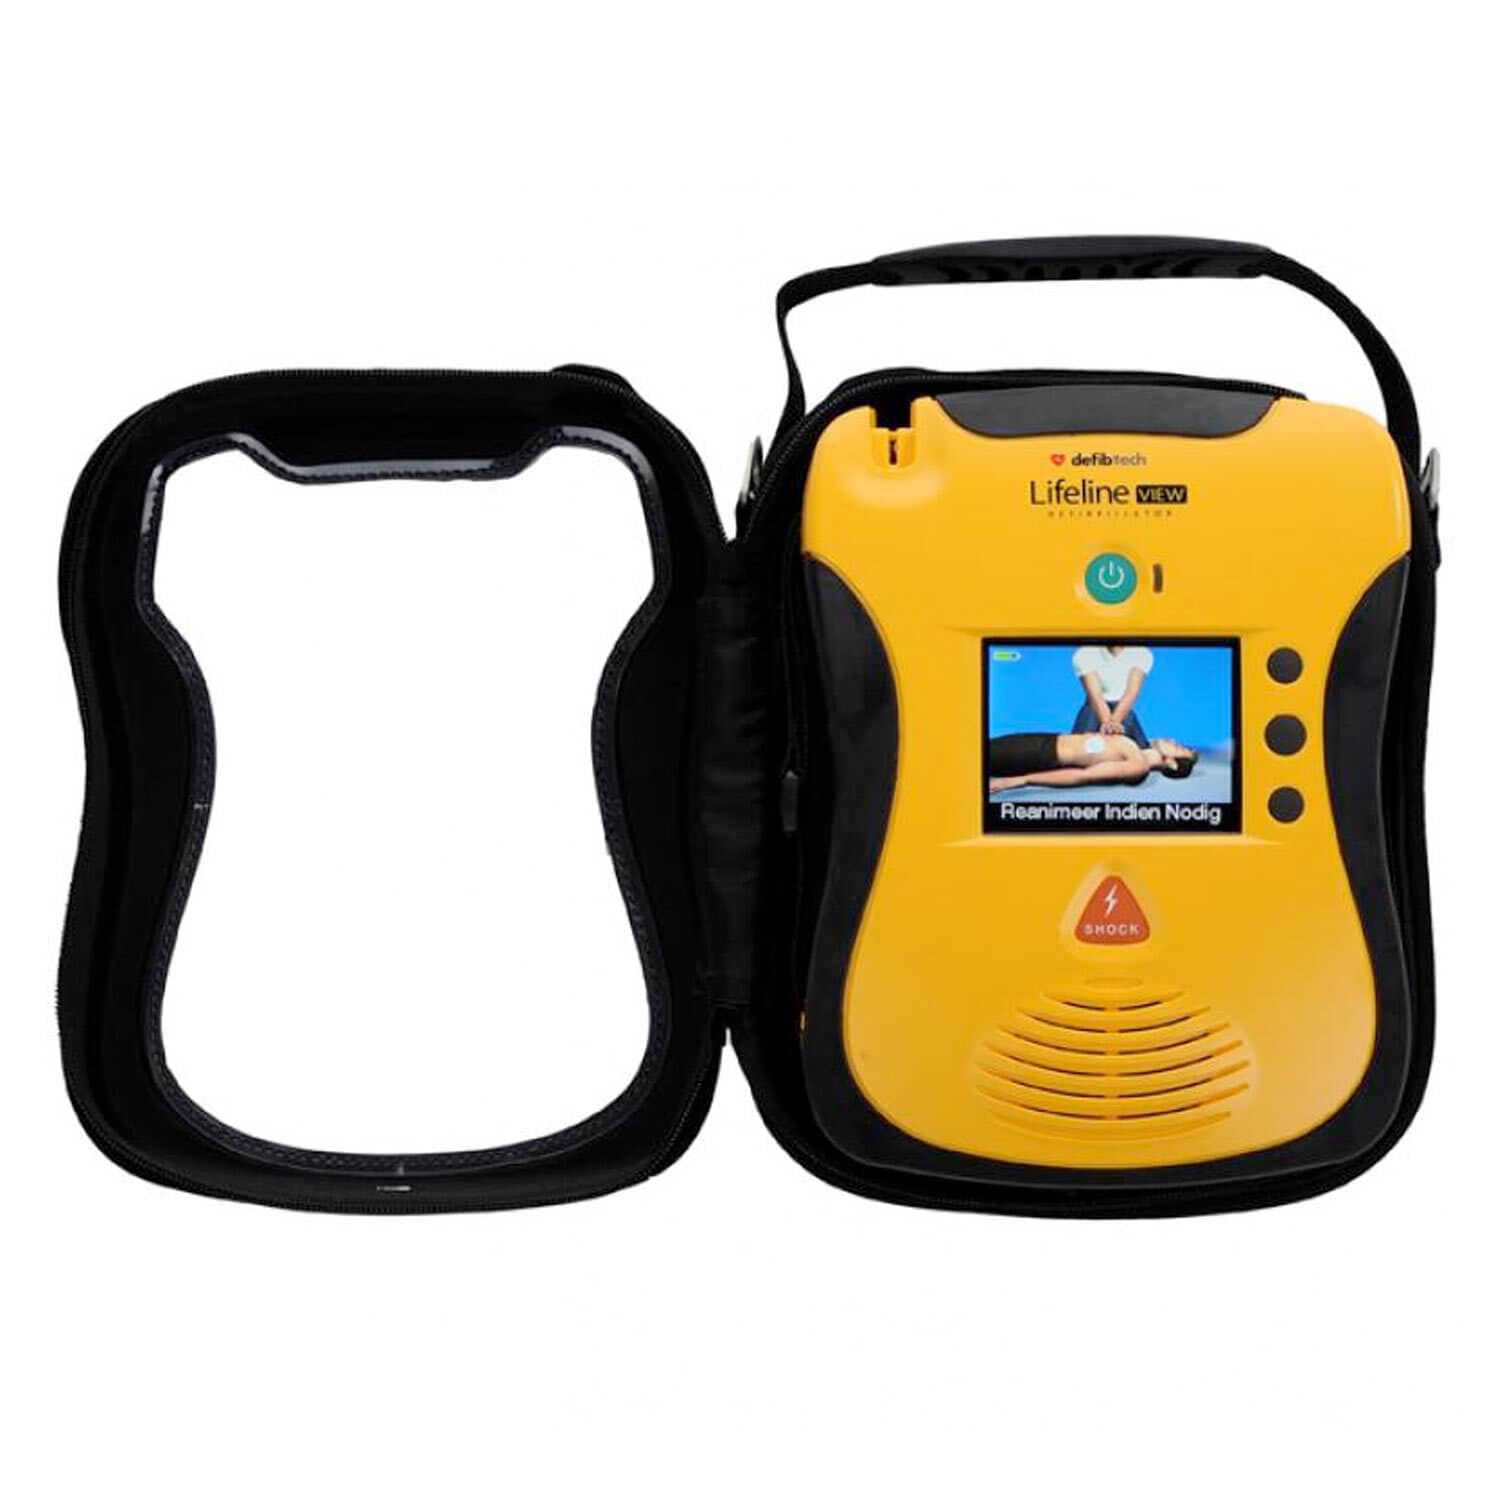 Comfortable Carrying Case For The Lifeline View Aed